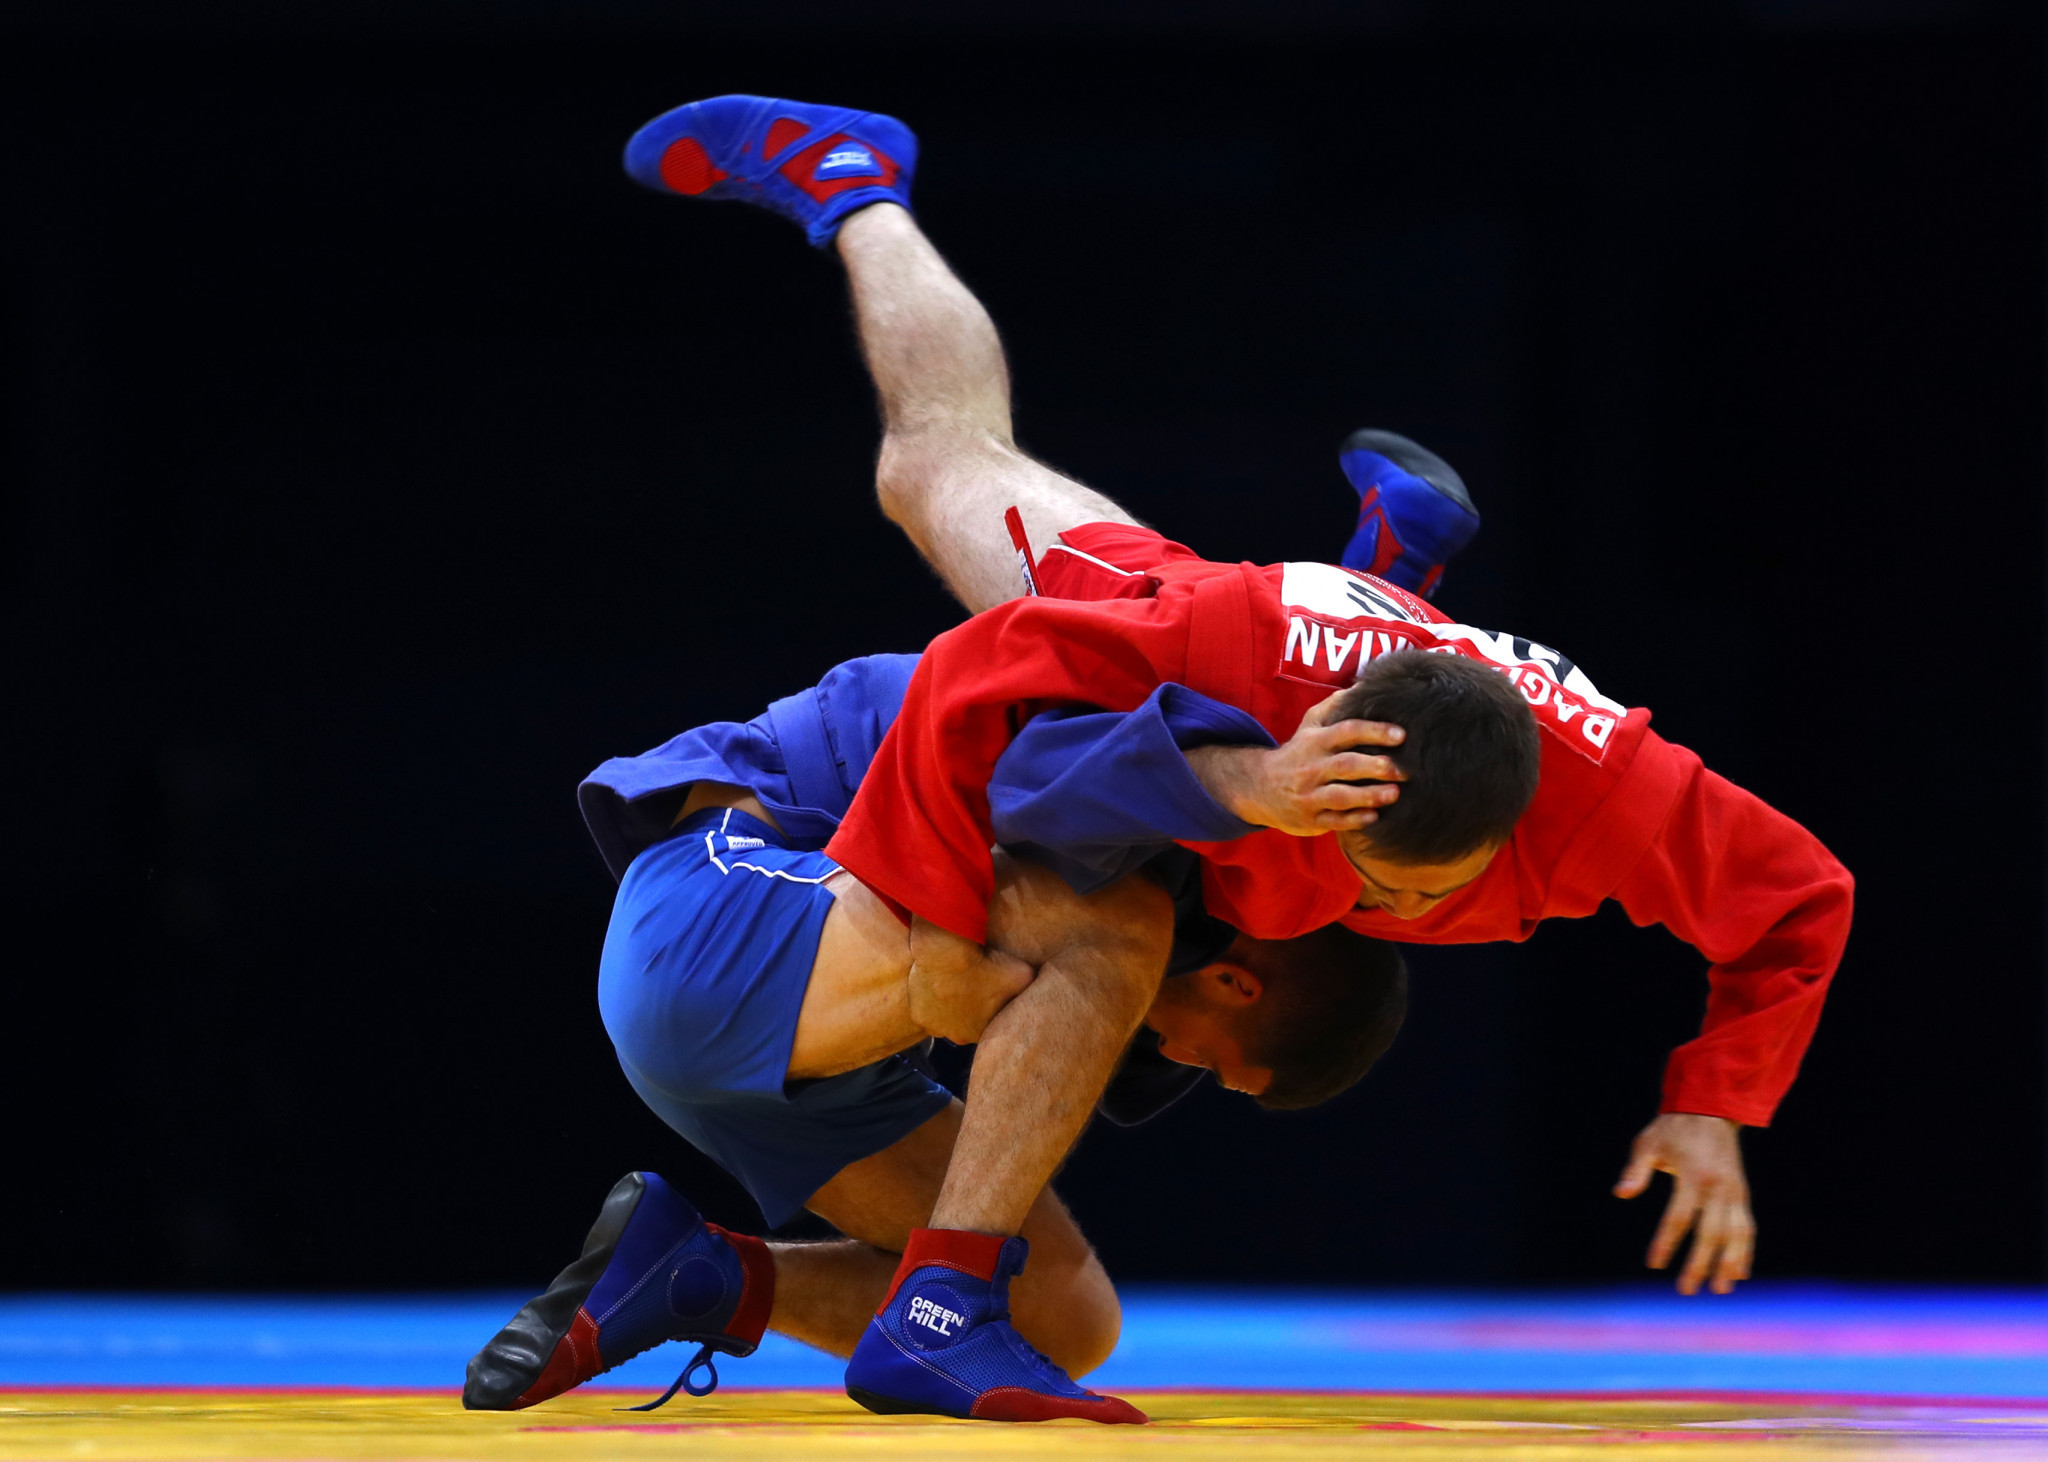 Four World Cups on four continents have been scheduled for the new sambo season ©Getty Images